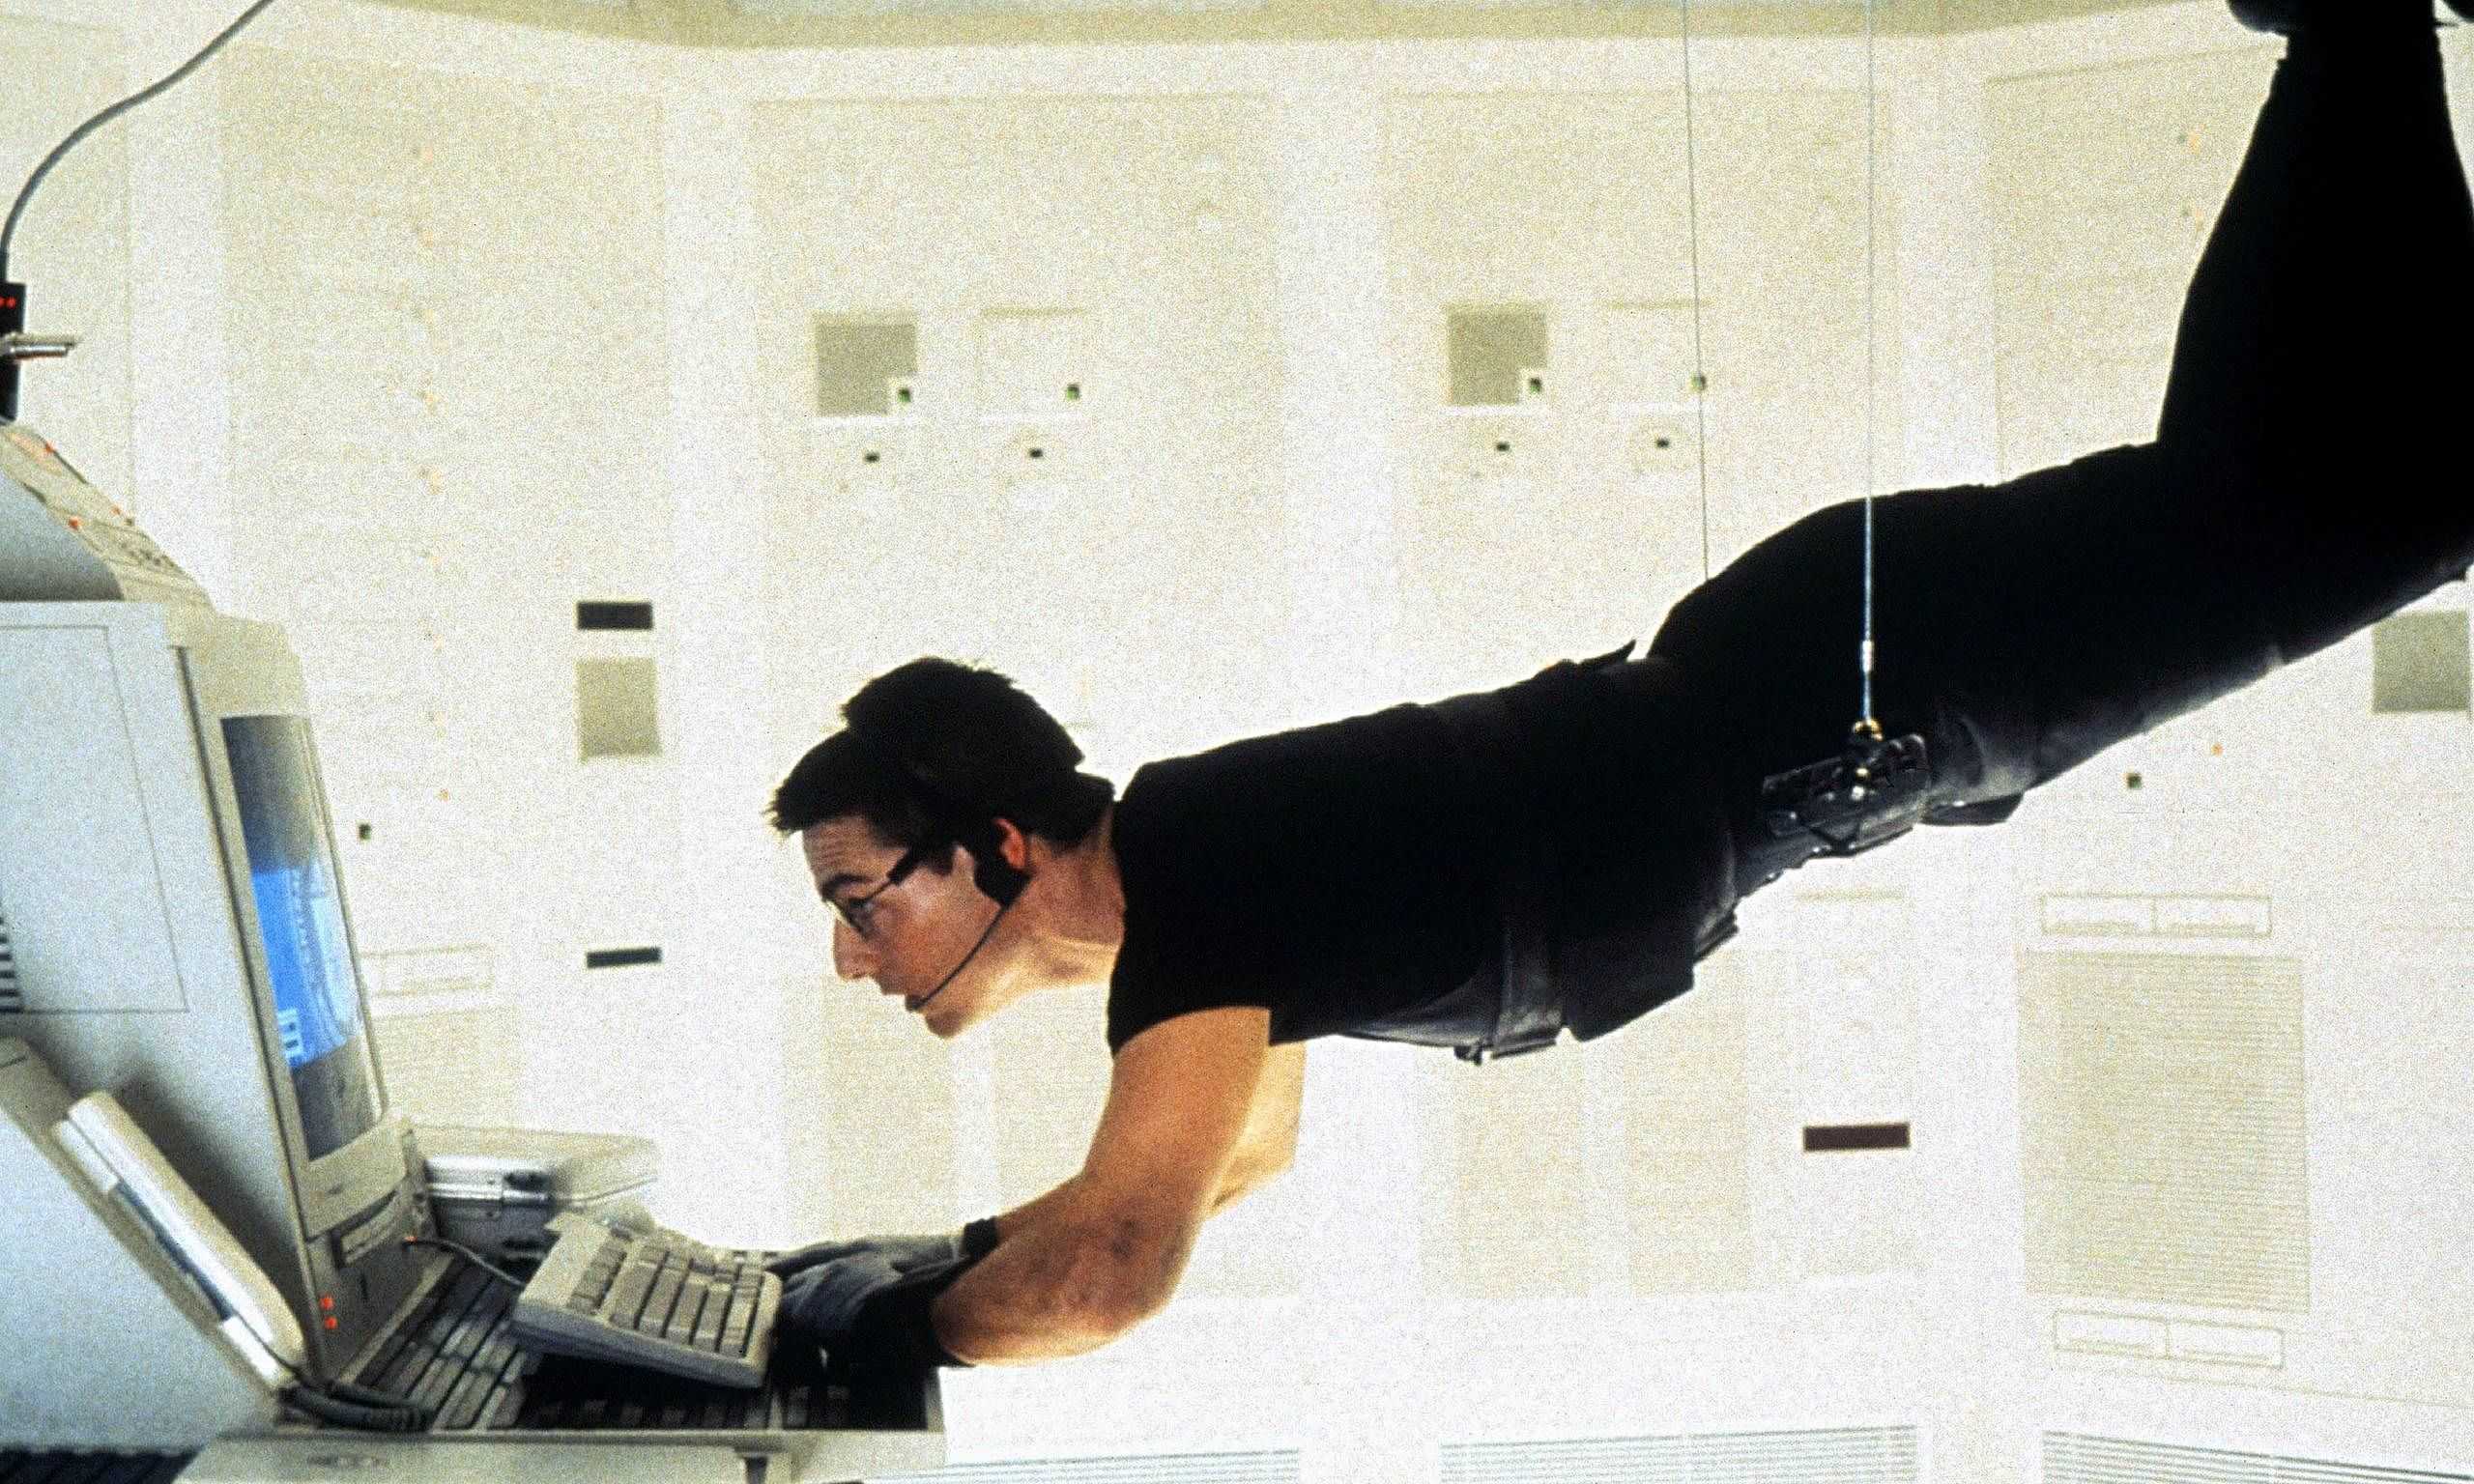 Sadly, Apple's Mission: Impossible deal doesn't quite work out as planned.